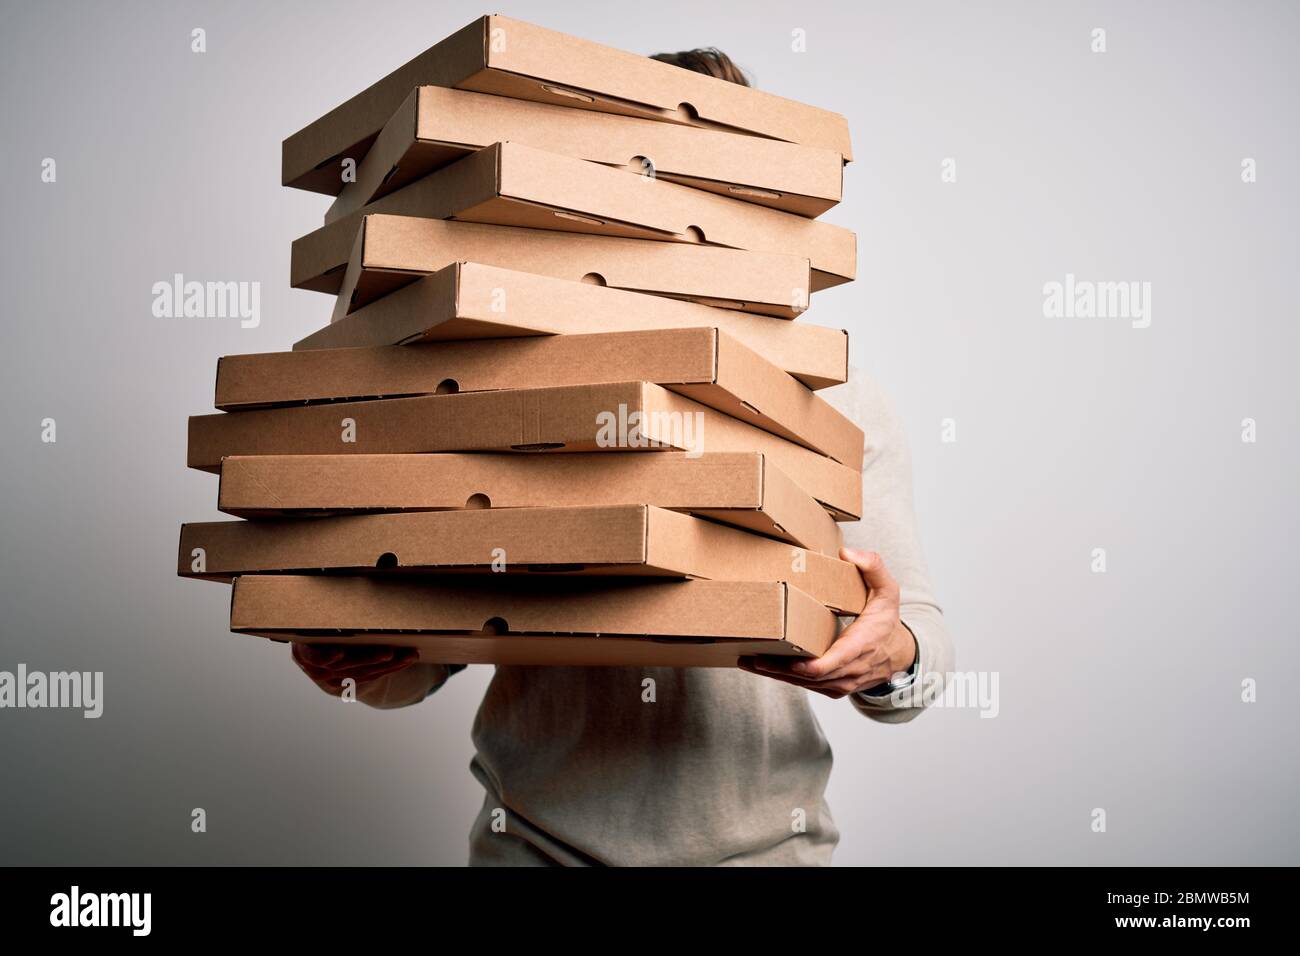 Deliveryman holding stack of caron boxes of italian pizza standing over isolated white background Stock Photo